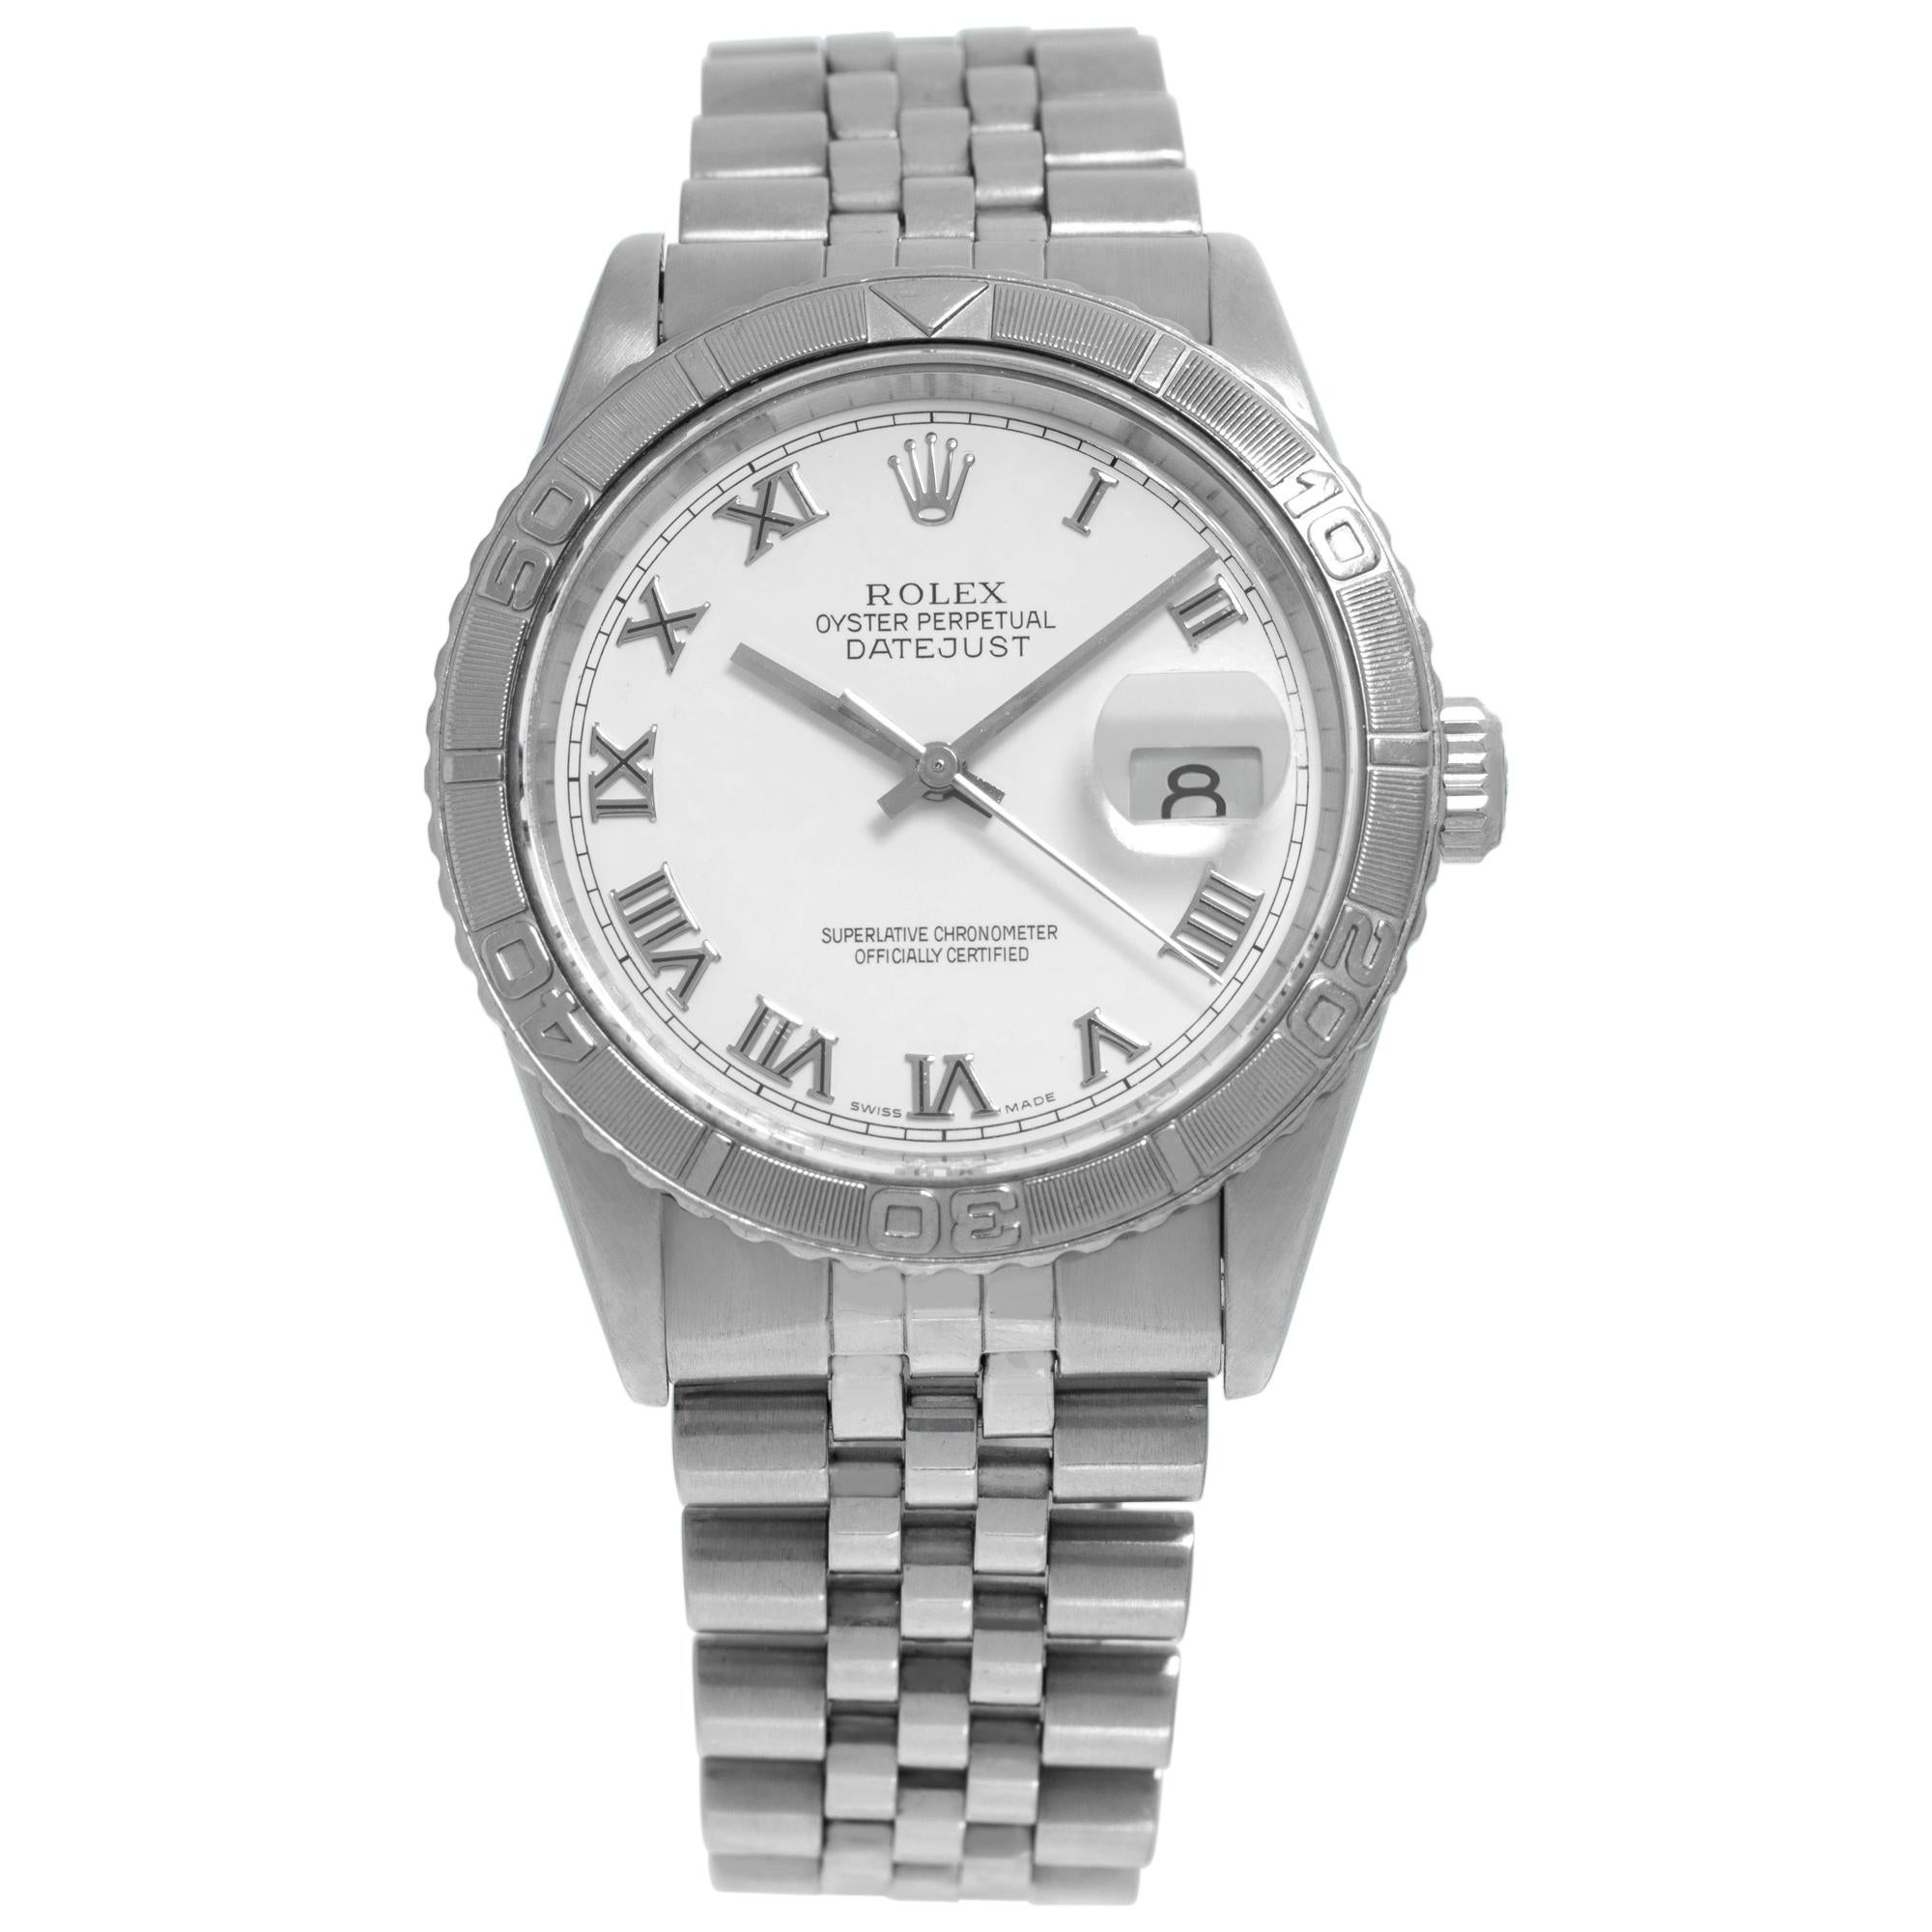 Rolex Datejust 16264 in Stainless Steel with a White dial 36mm Automatic watch For Sale